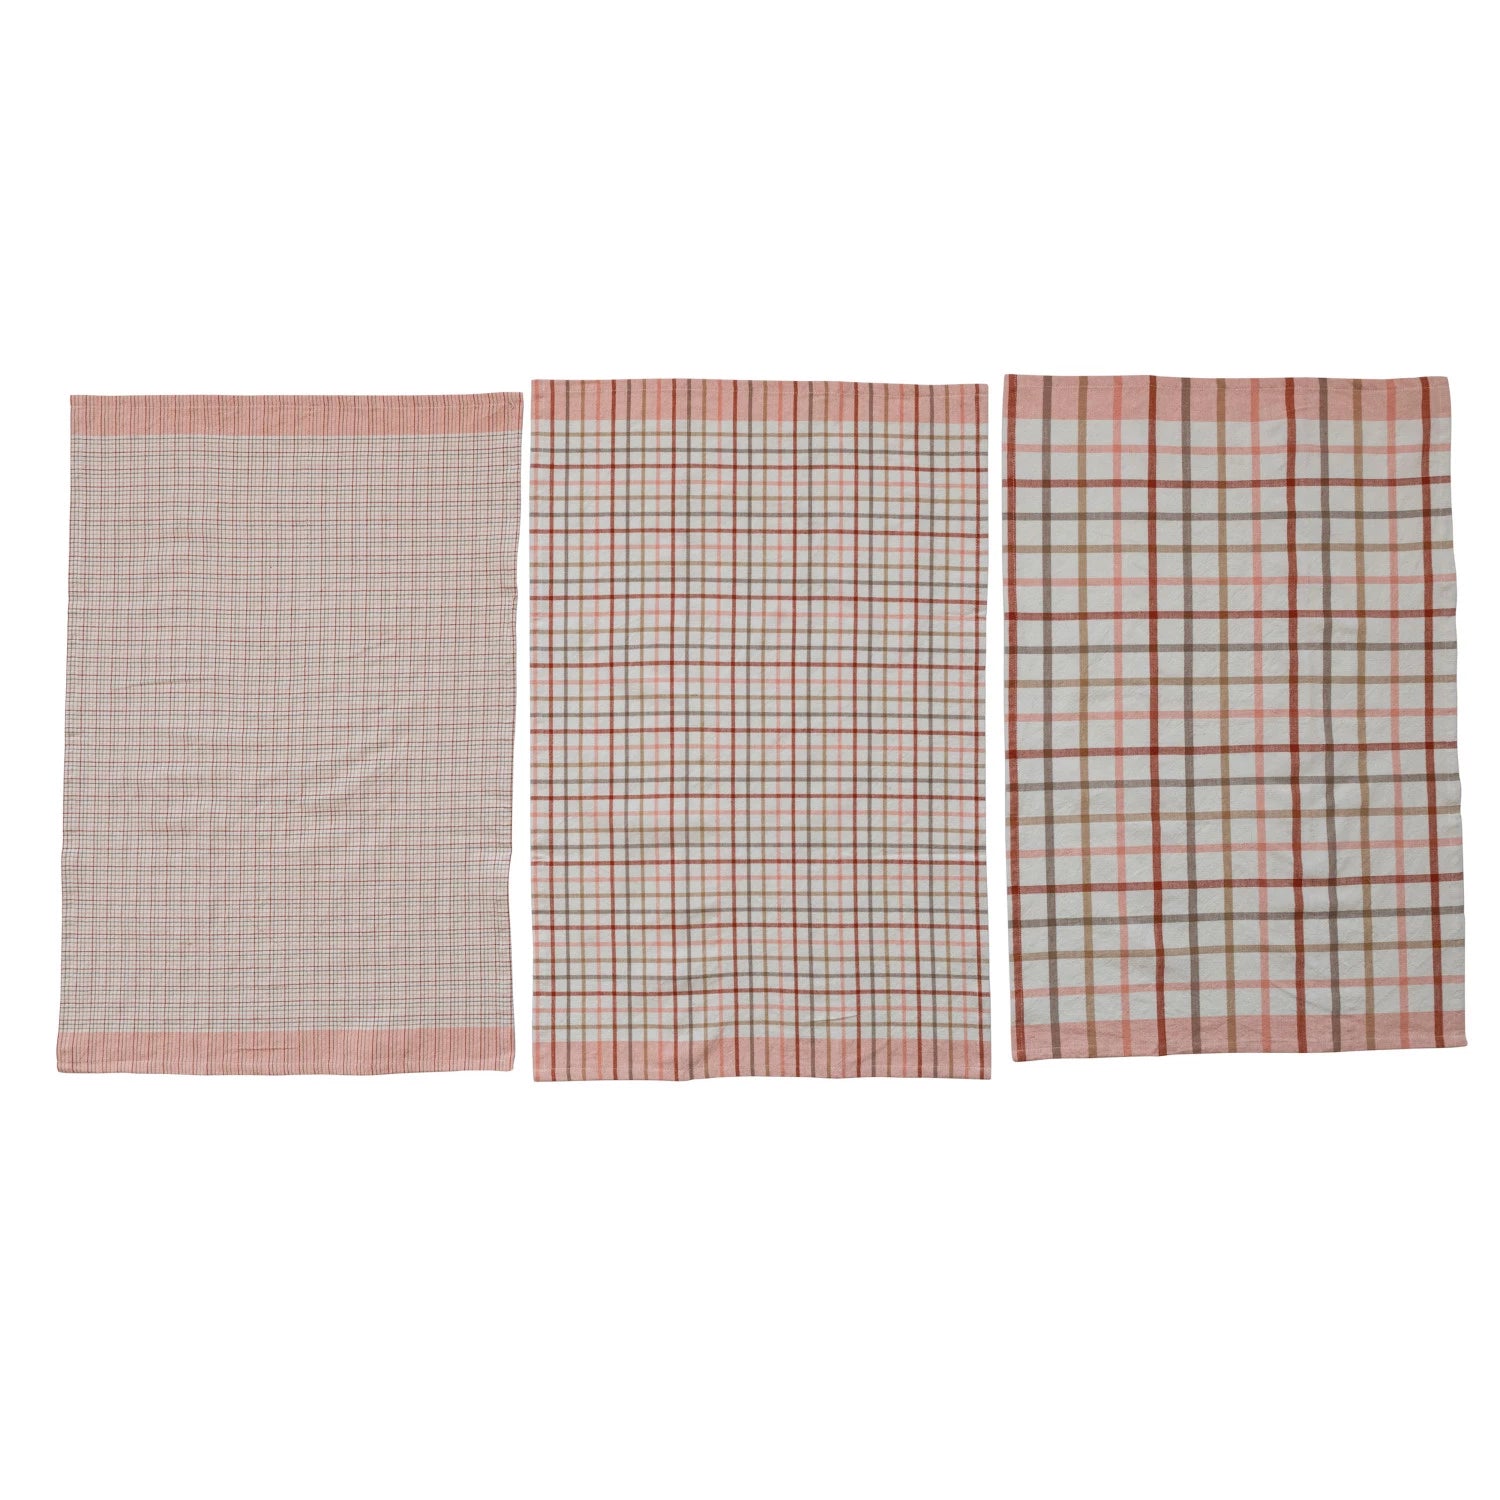 3 assorted dishtowels with plaid patterns laying flat on a white background.